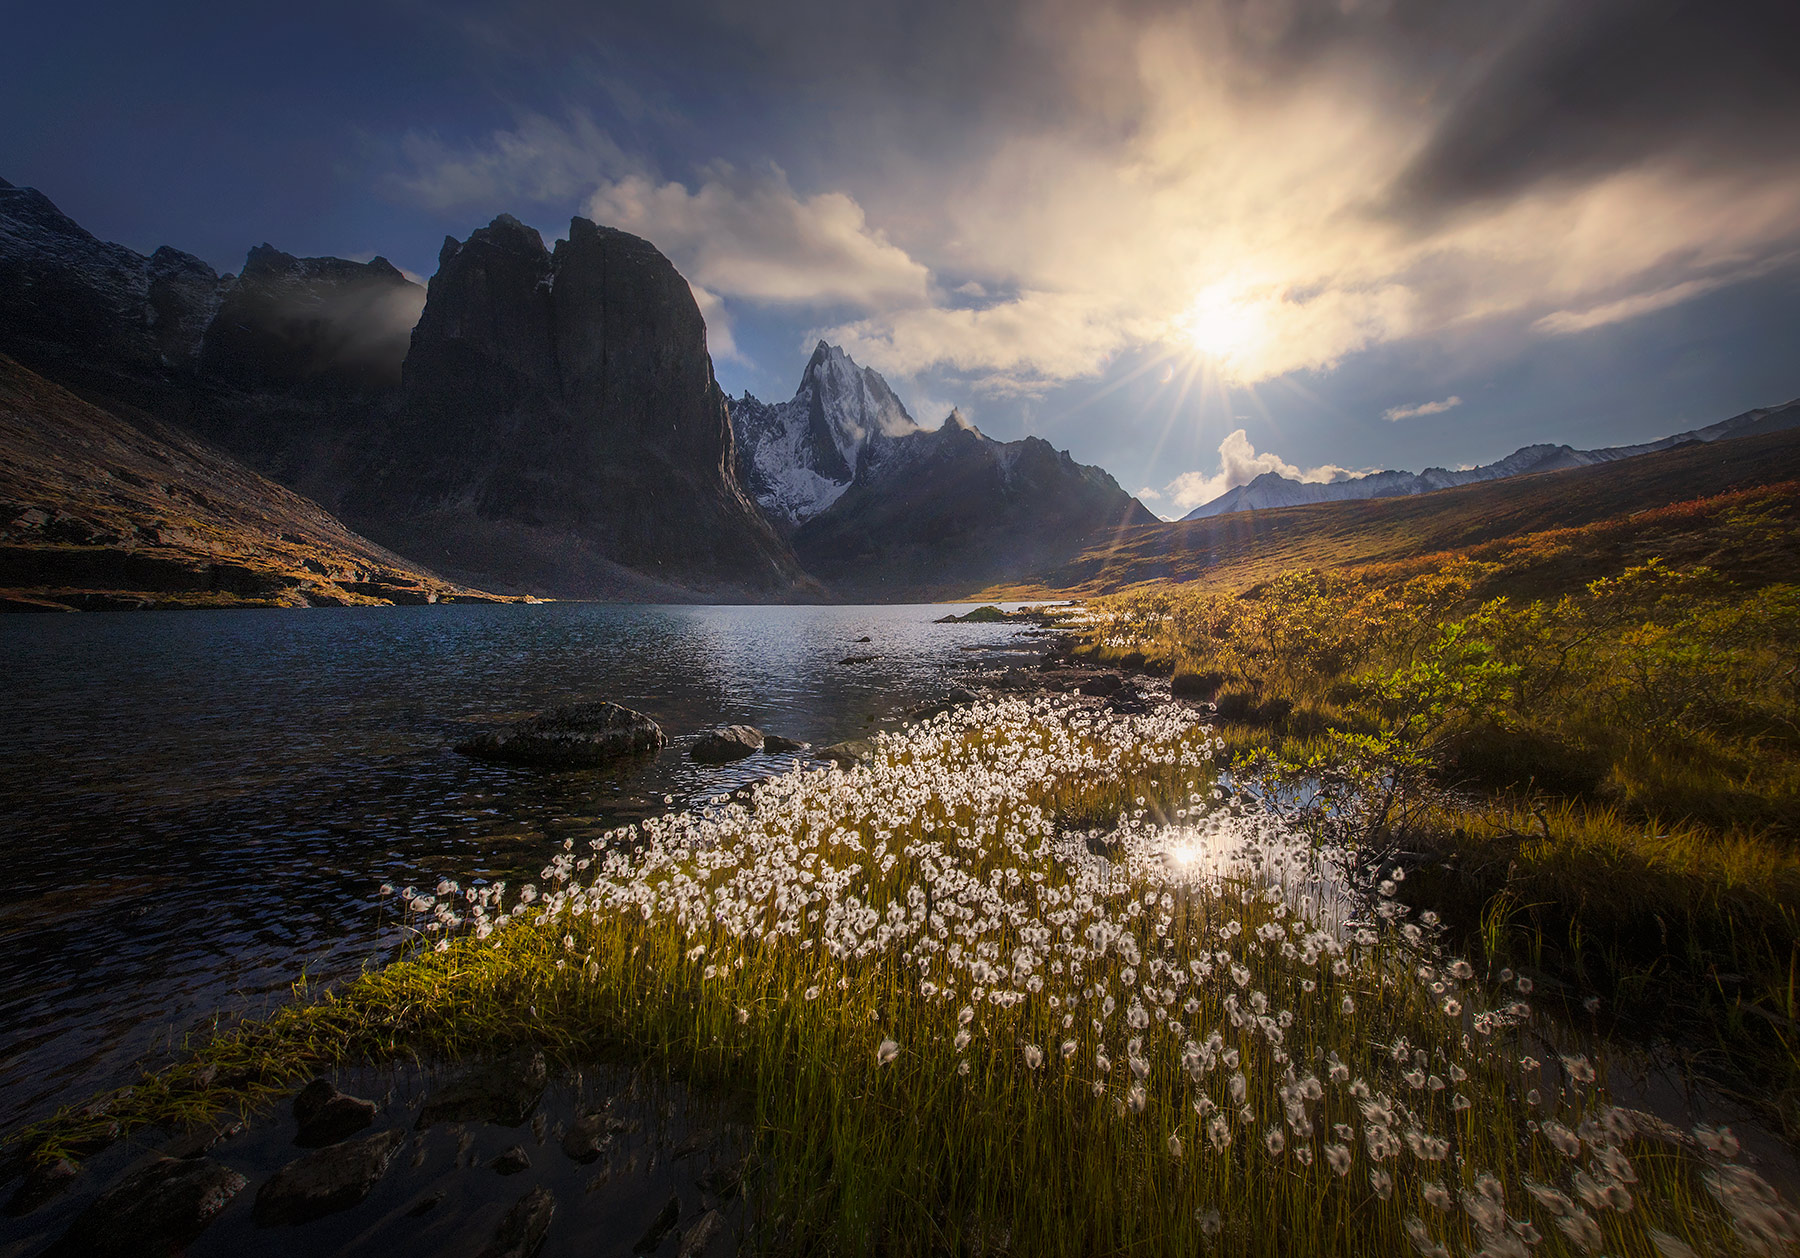 Fall comes to the Arctic&nbsp;Yukon as Alaskan Cottongrass catches the backlight dancing across the golden fields.&nbsp;